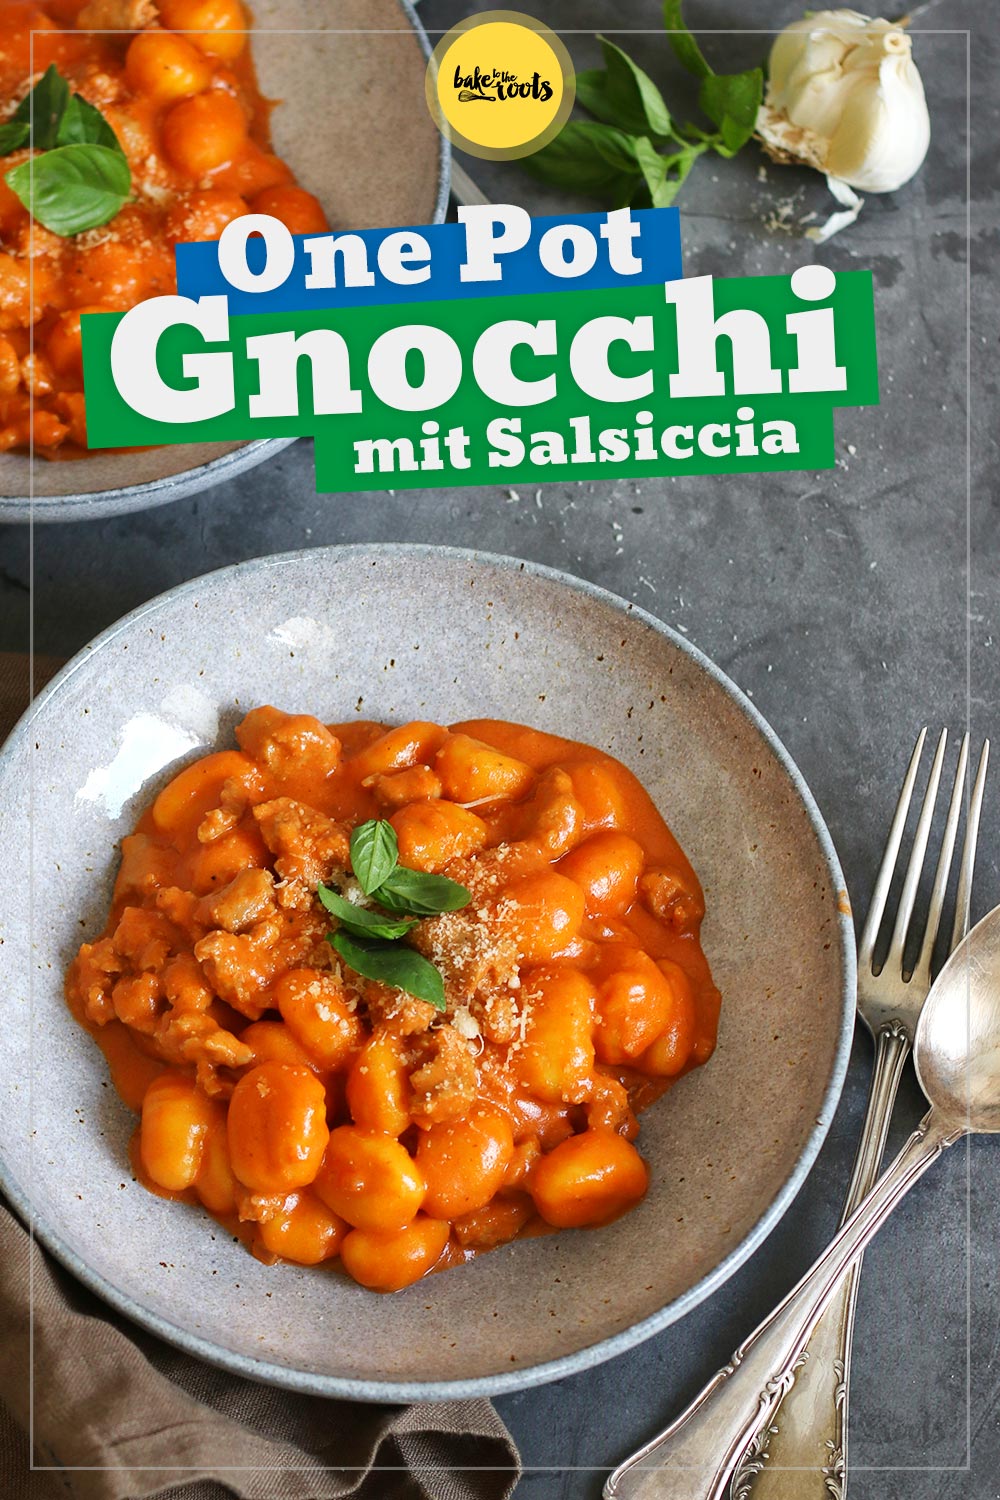 One-Pot Gnocchi mit Salsiccia | Bake to the roots